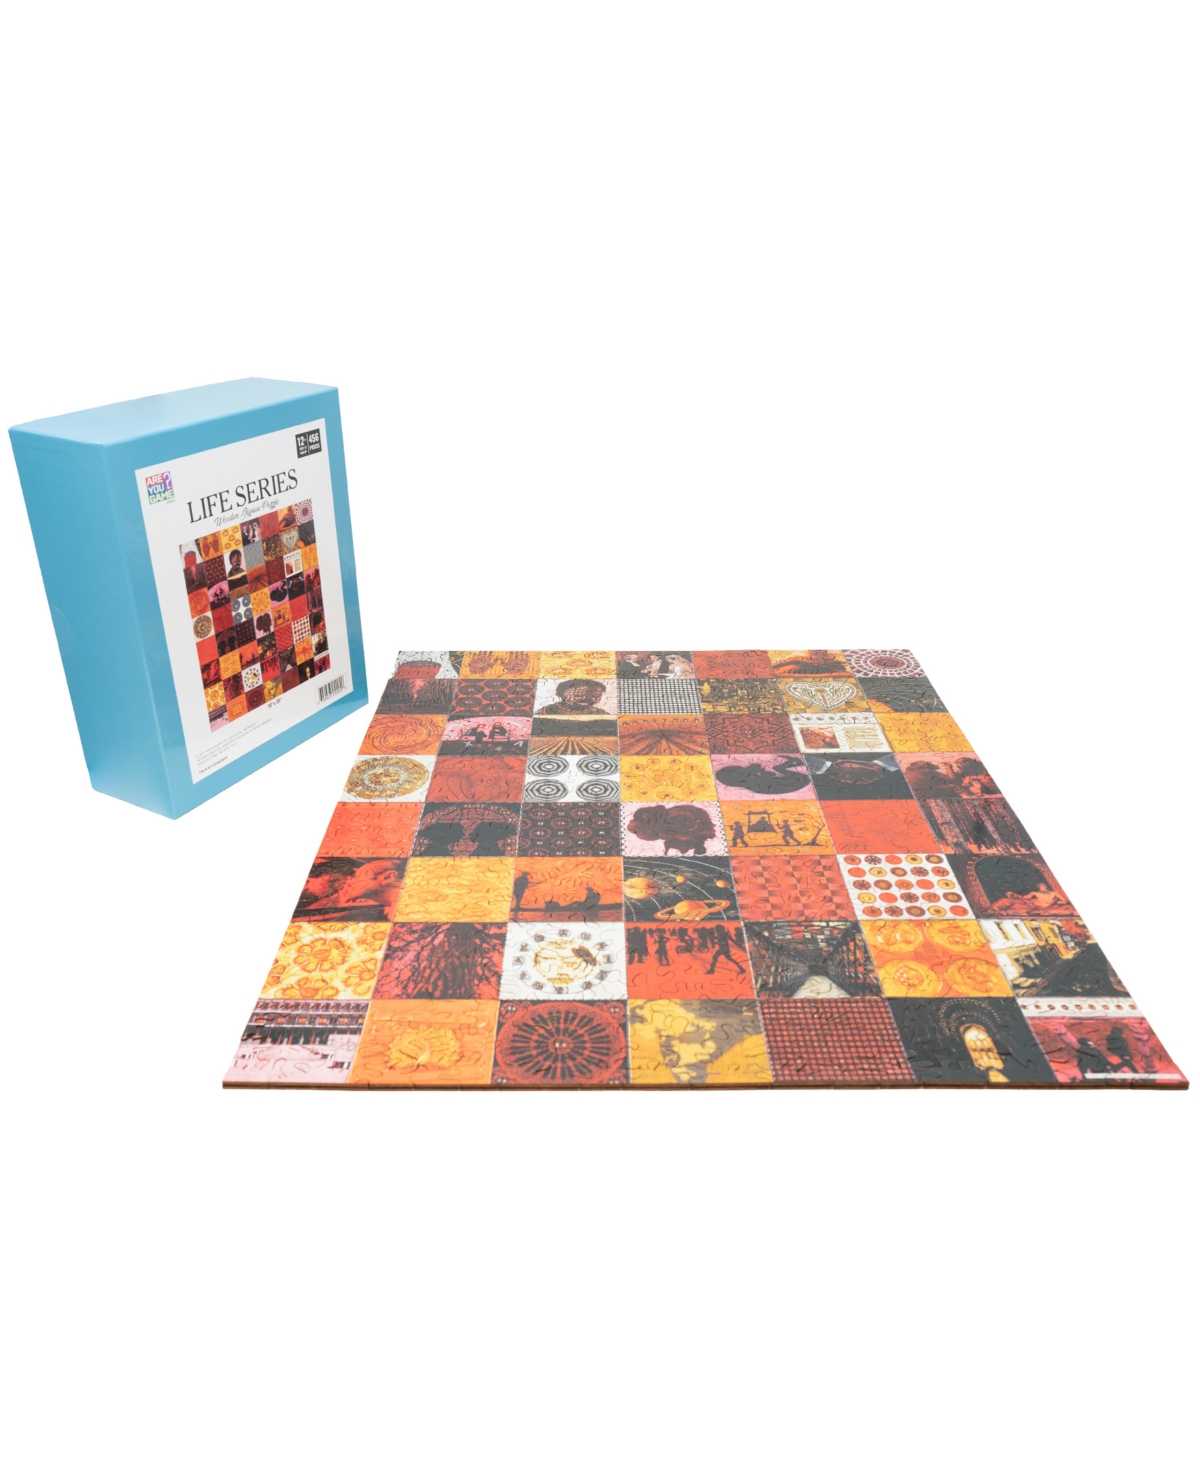 Shop University Games Areyougame.com Wooden Jigsaw Puzzle Life Series, 456 Pieces In No Color